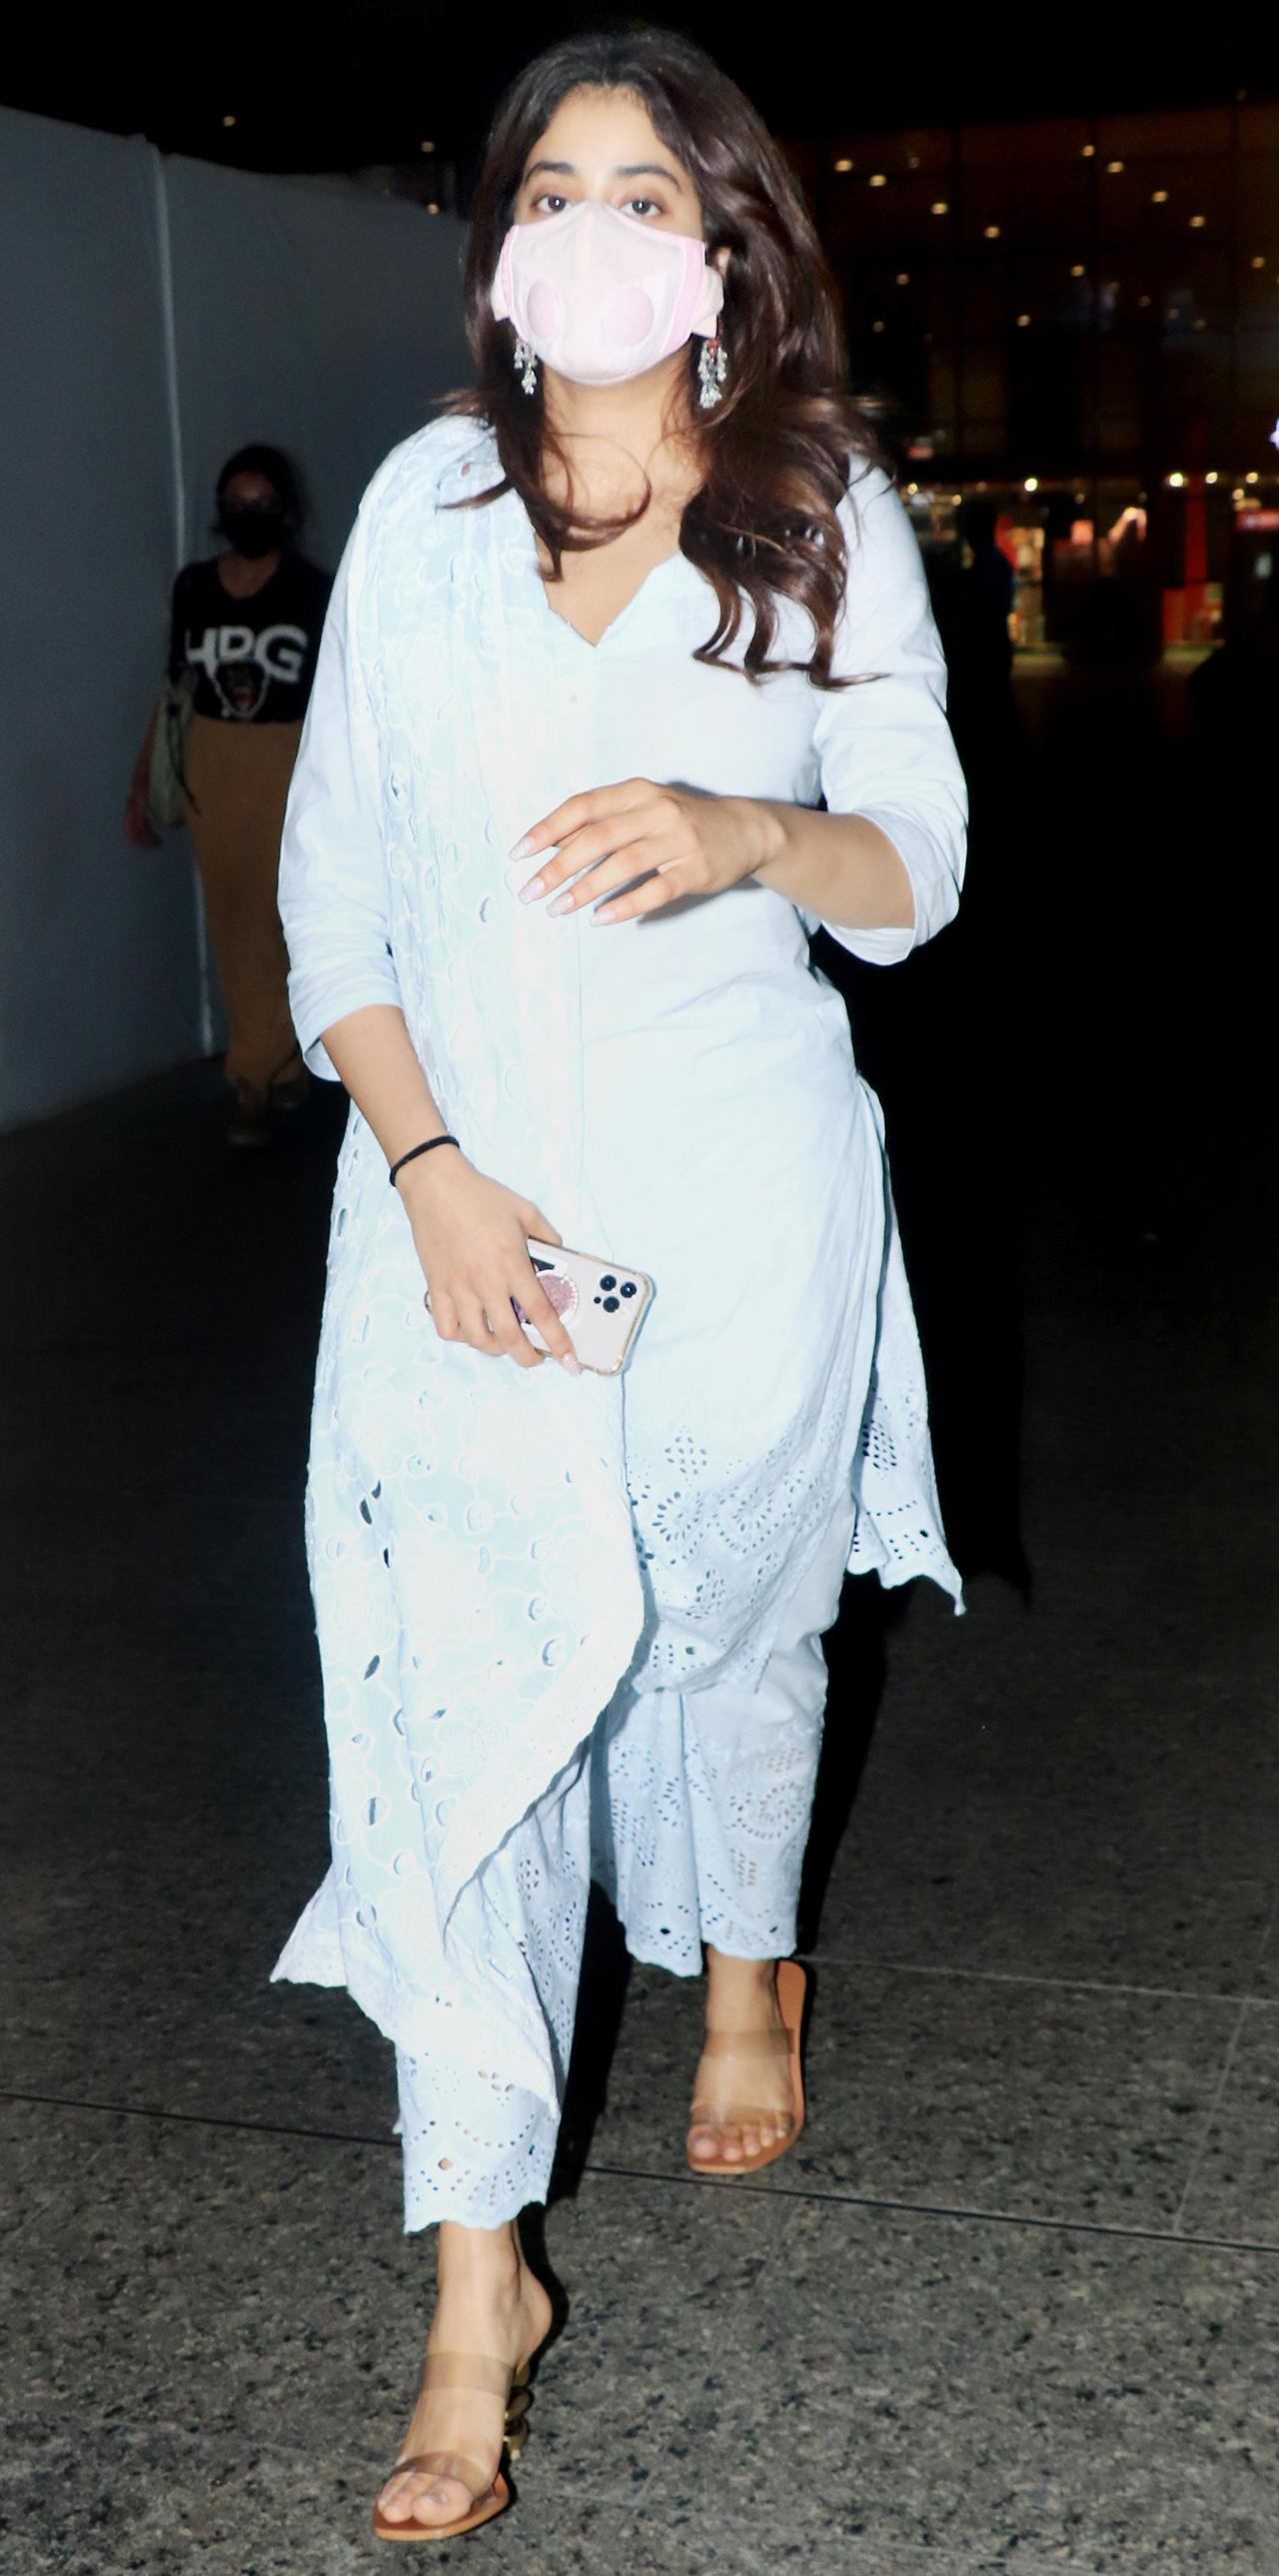 Janhvi Kapoor looked pretty in her traditional attire as she arrived at the Mumbai airport. Janhvi's debut film Dhadak recently completed 3 years, she shared a behind the scene photo from sets of the film and wrote, 